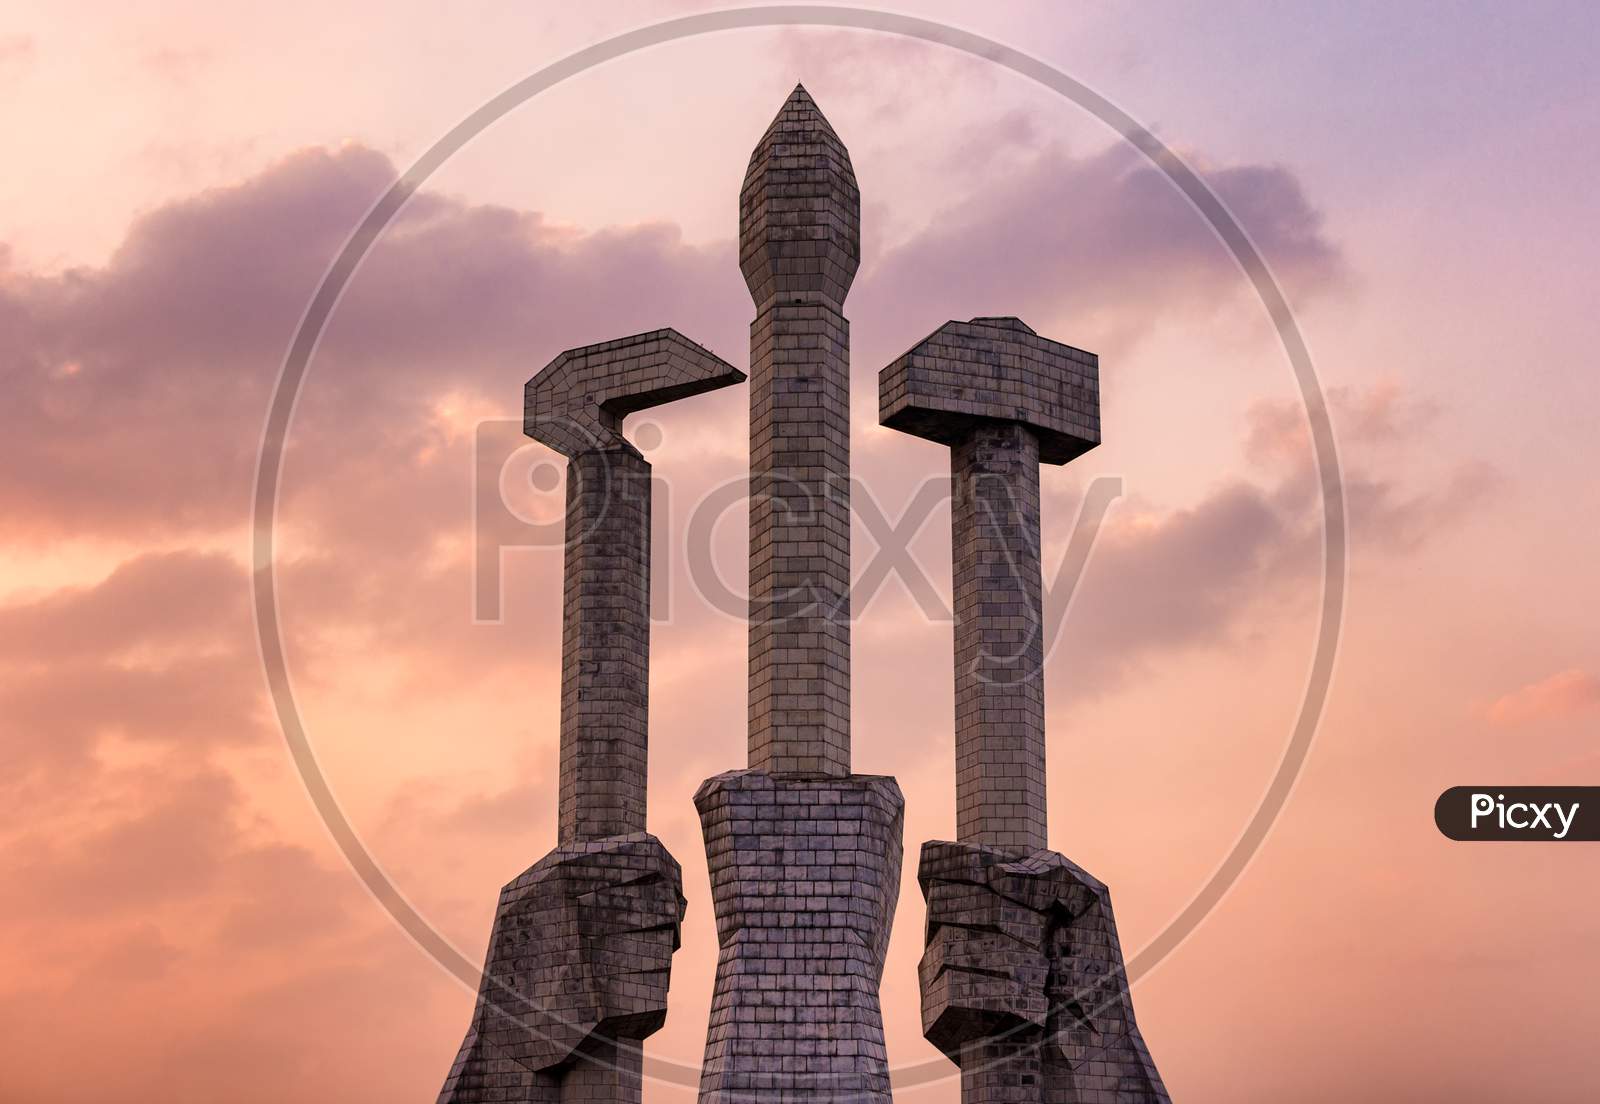 Monument To Party Founding In Pyongyang, North Korea